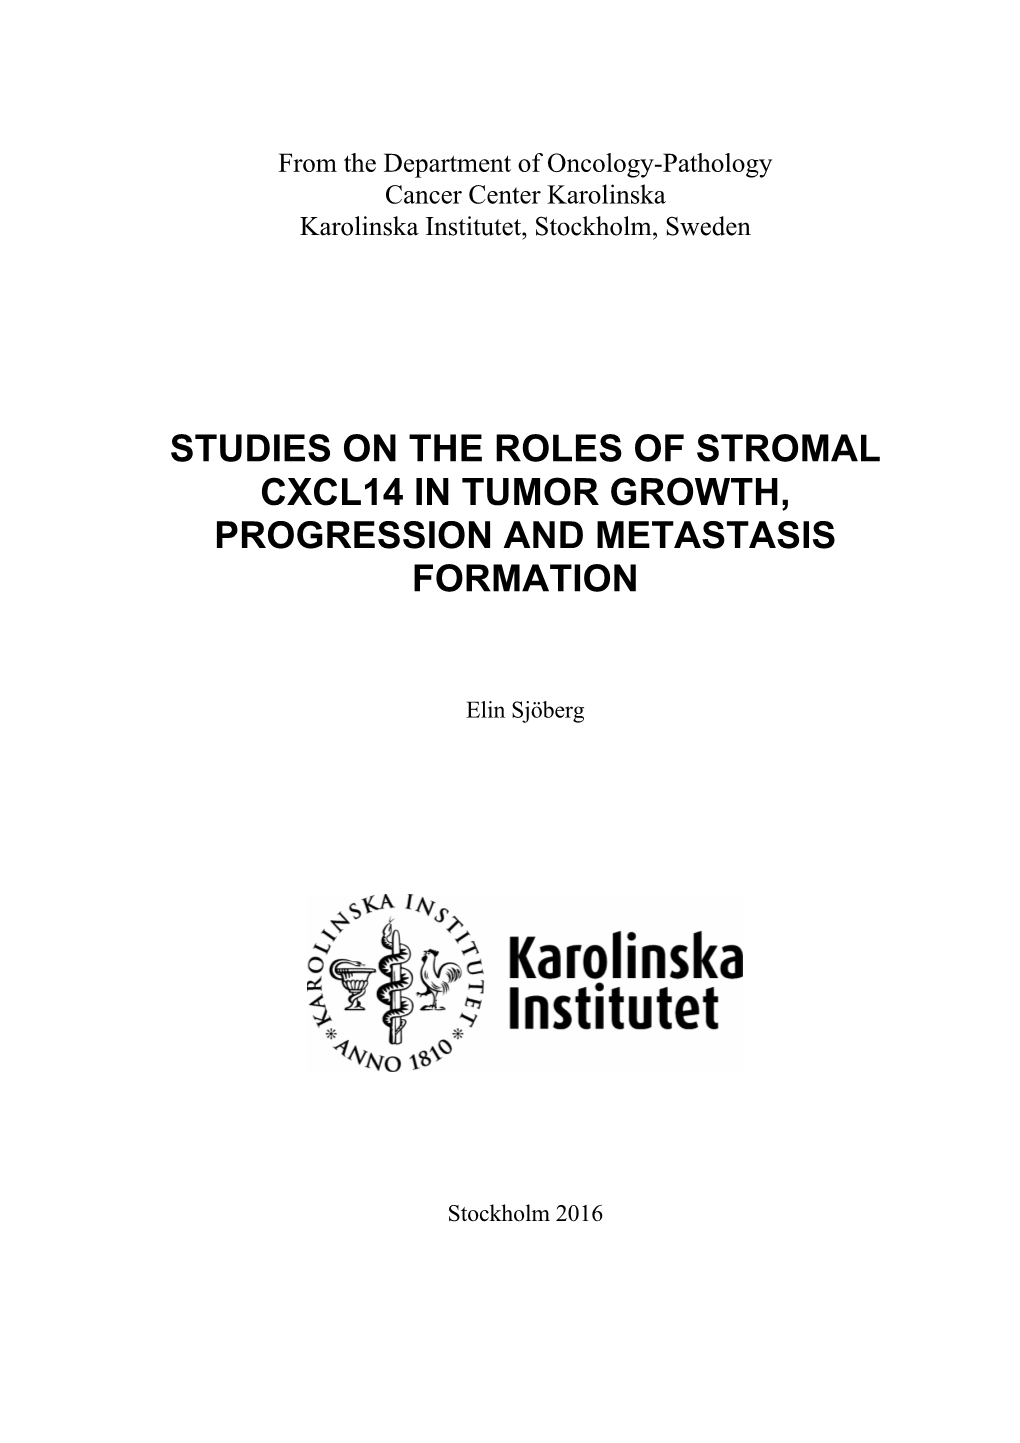 Studies on the Roles of Stromal Cxcl14 in Tumor Growth, Progression and Metastasis Formation